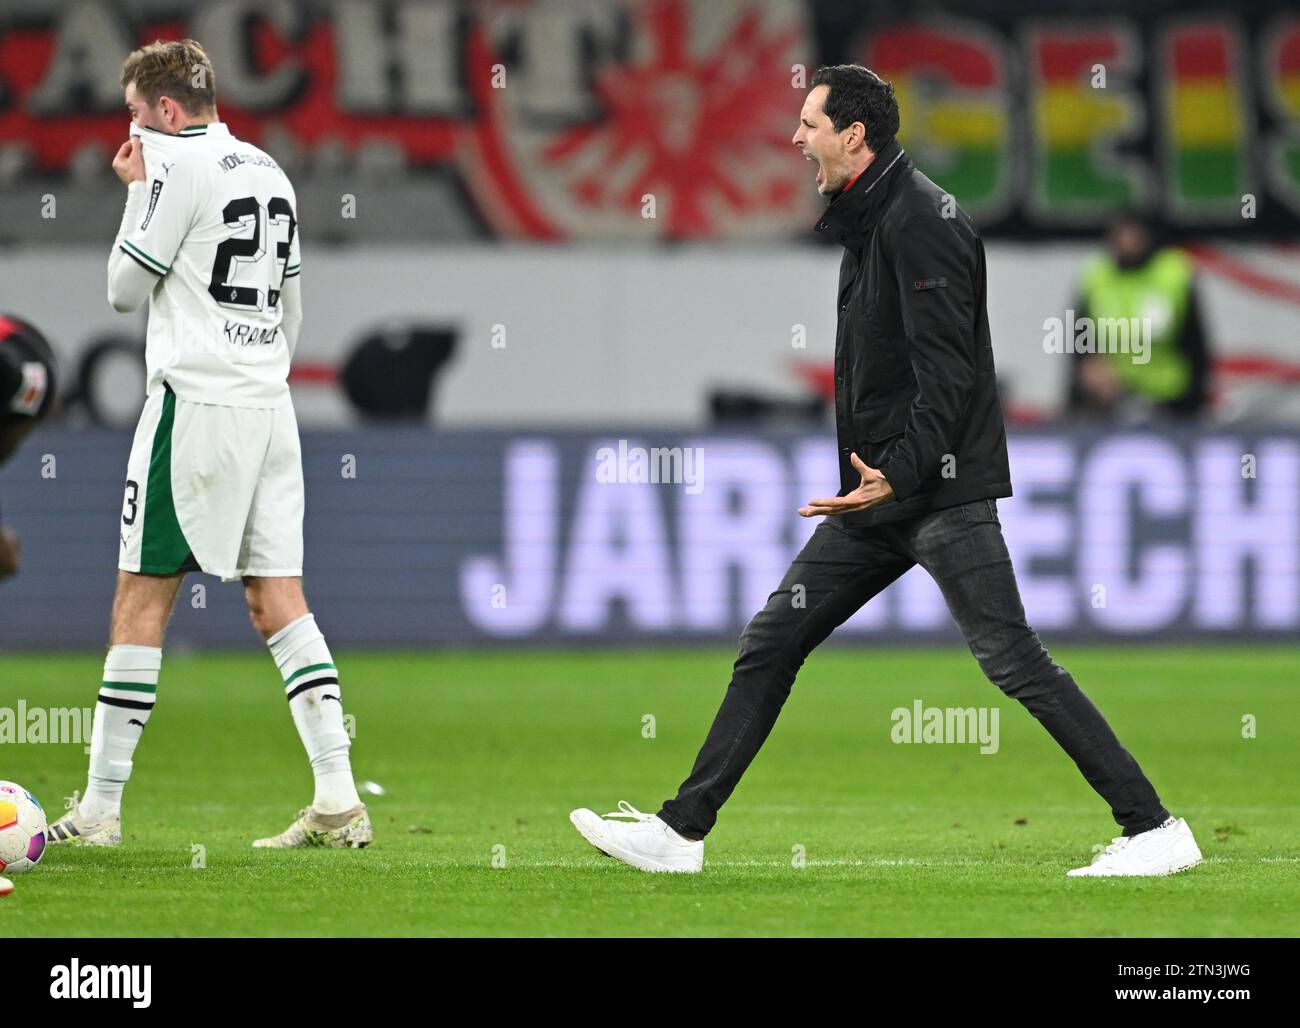 20 December 2023, Hesse, Frankfurt/Main: Soccer: Bundesliga, Eintracht Frankfurt - Borussia Mönchengladbach, matchday 16, at Deutsche Bank Park. Frankfurt head coach Dino Toppmöller (r) celebrates next to Mönchengladbach's Christoph Kramer after the 2:1 victory. Photo: Arne Dedert/dpa - IMPORTANT NOTE: In accordance with the regulations of the DFL German Football League and the DFB German Football Association, it is prohibited to utilize or have utilized photographs taken in the stadium and/or of the match in the form of sequential images and/or video-like photo series. Stock Photo